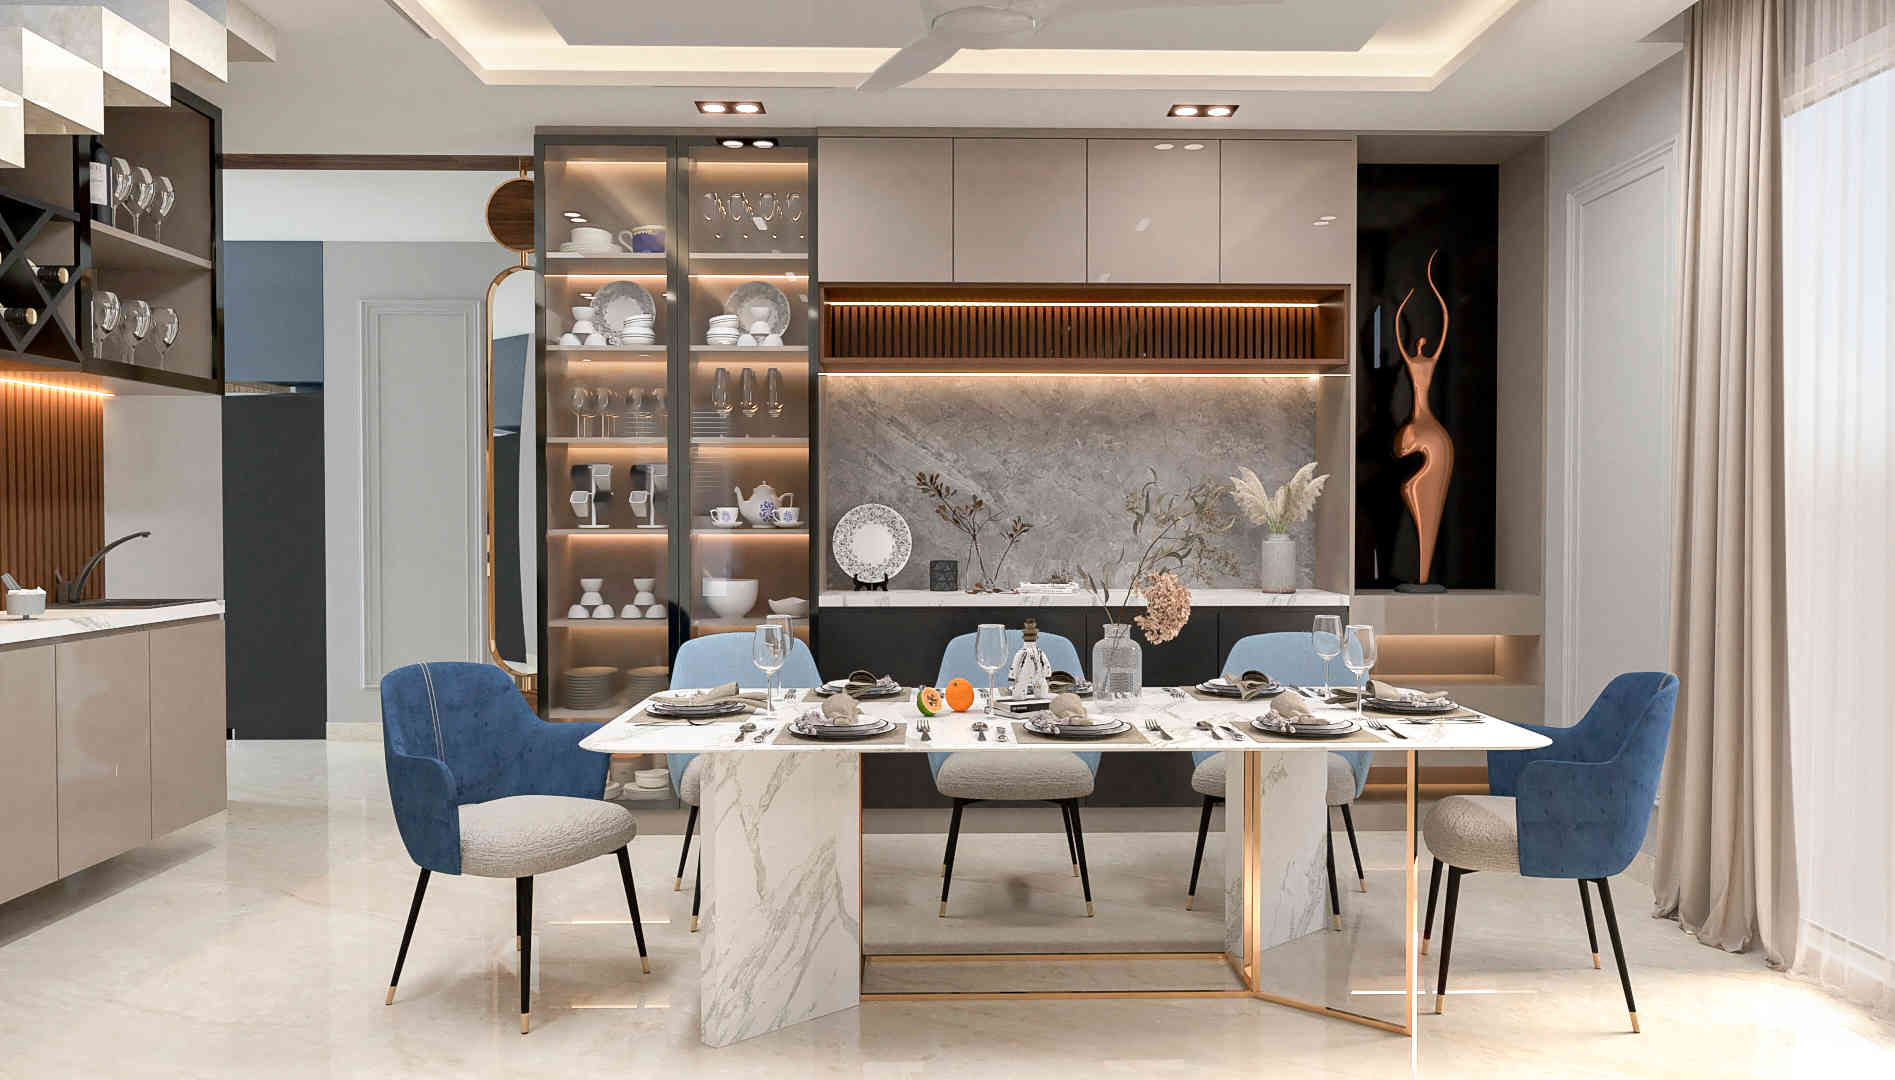 Modern Dining Room Design With Crockery And Buffet Unit